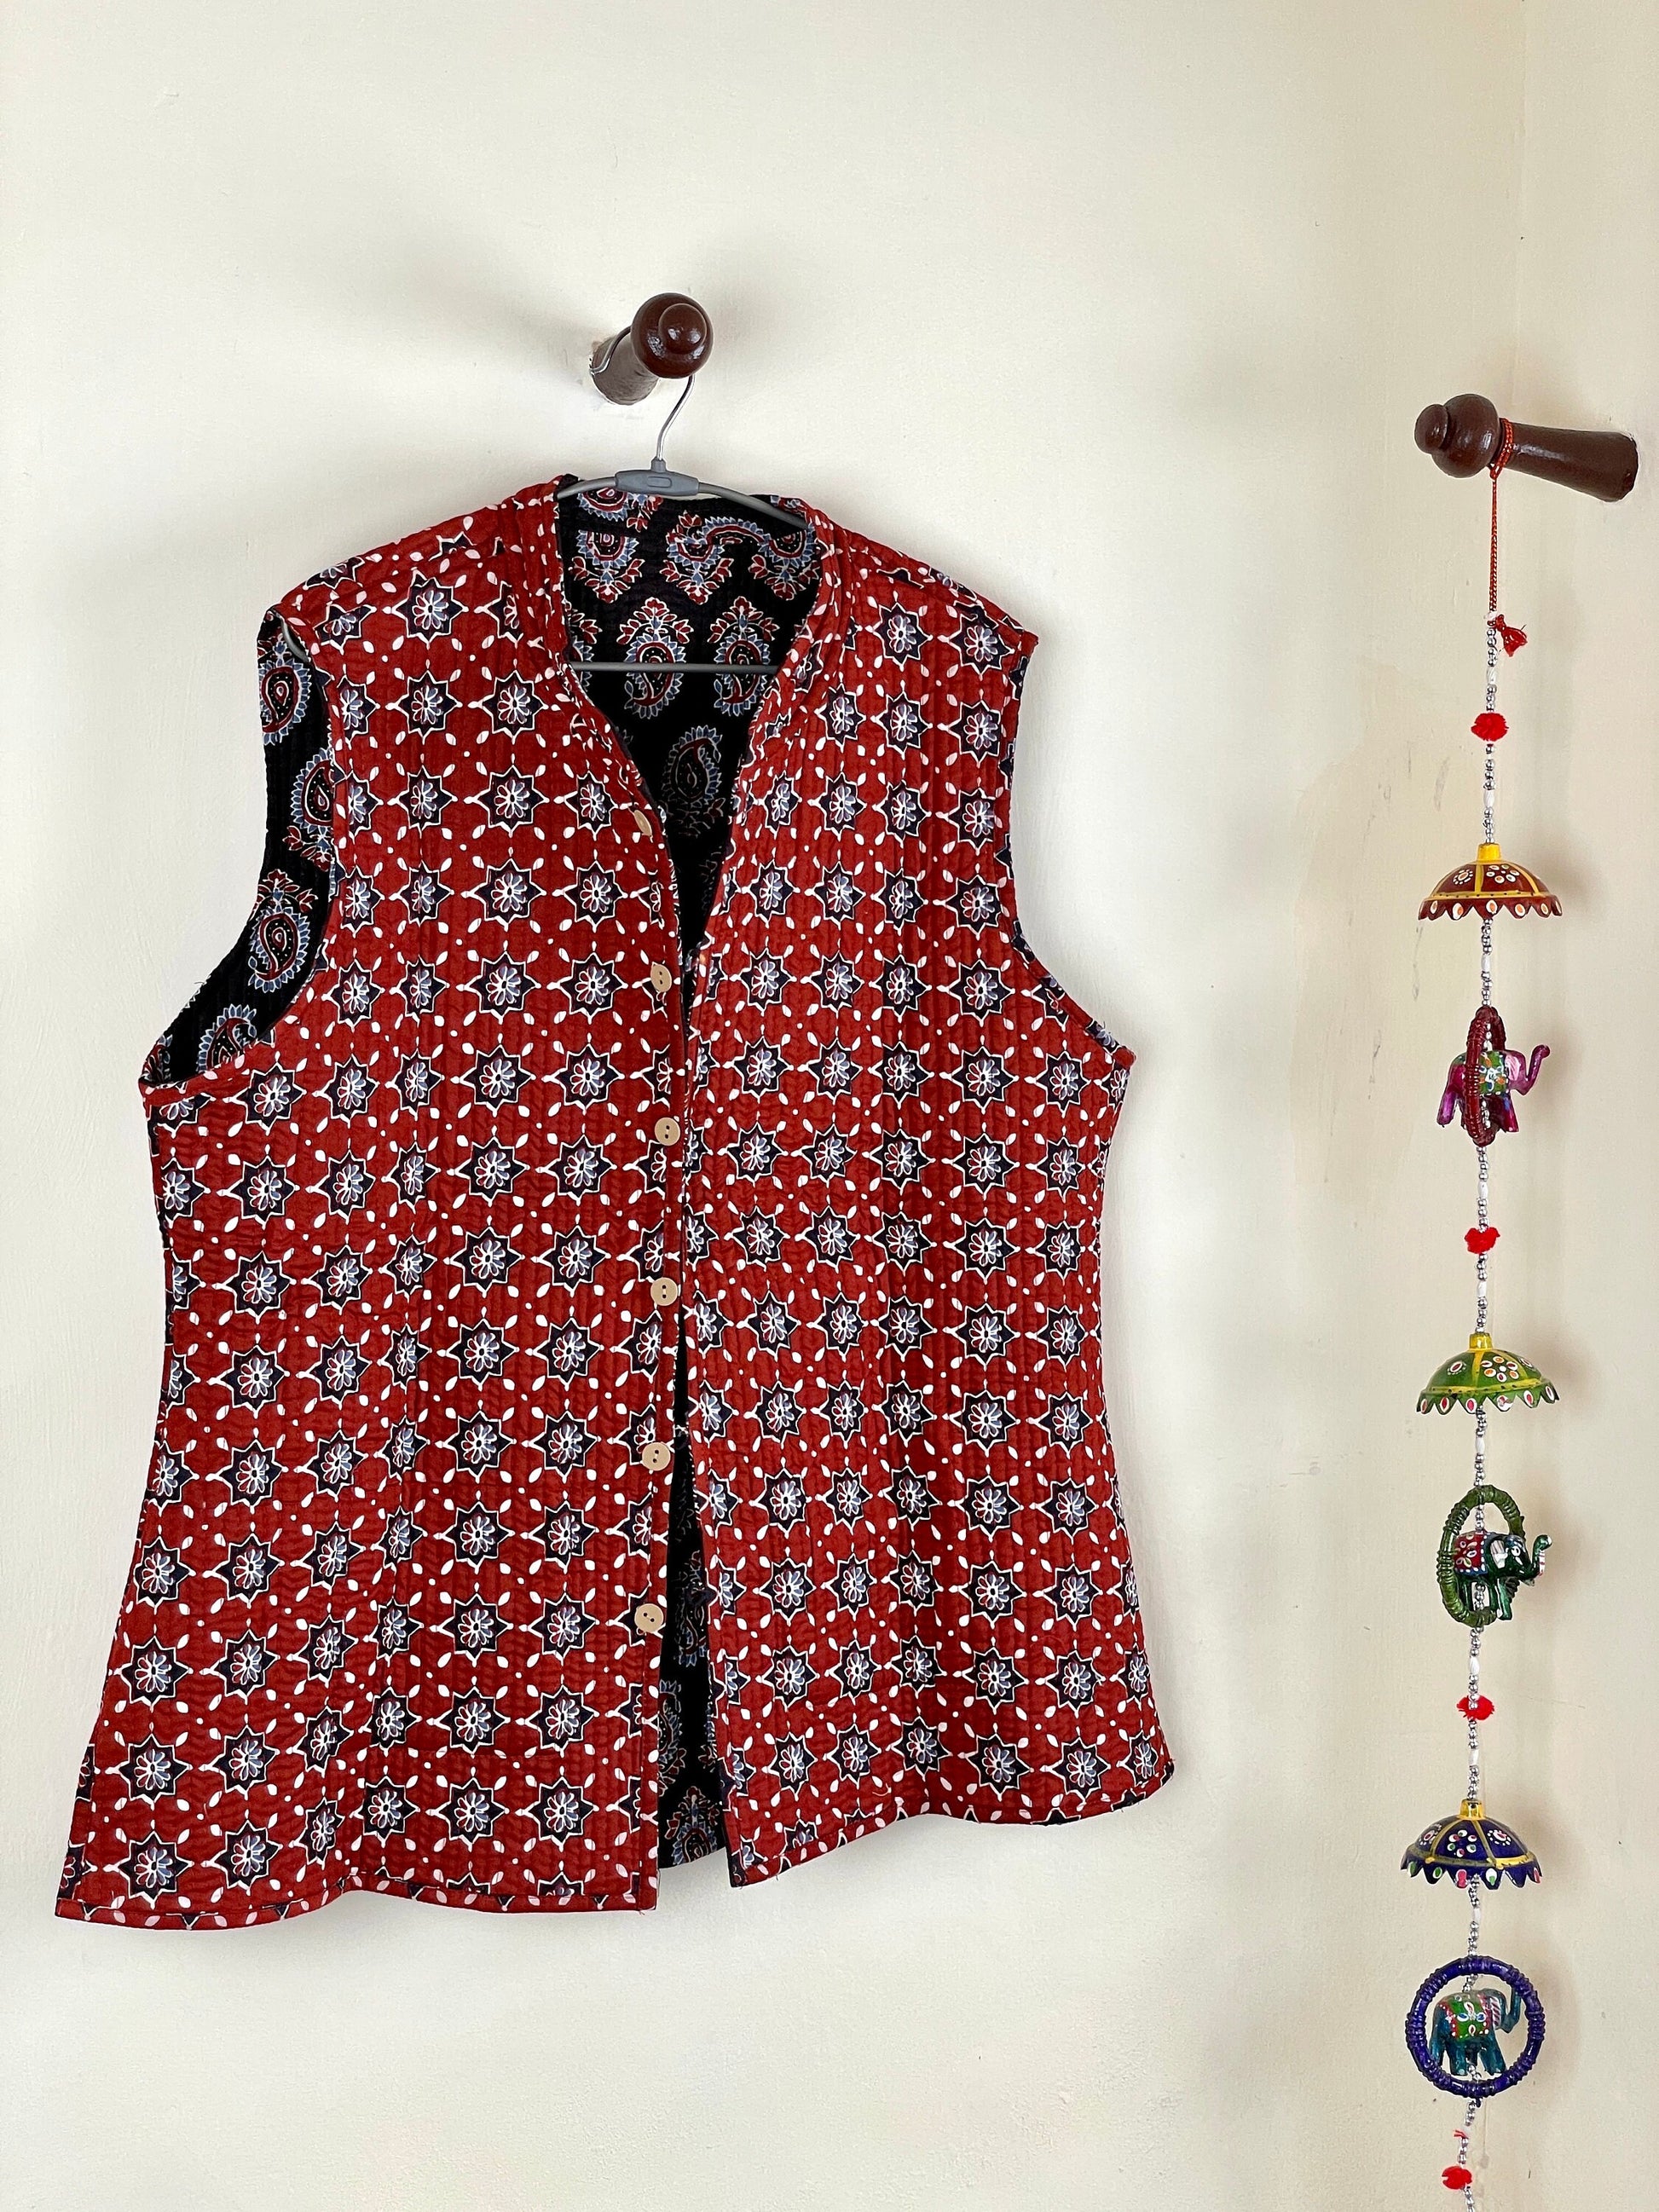 Indian Handmade Quilted Cotton Sleeveless Jacket Black & Red Stylish Women's Vest, Reversible Waistcoat for Her